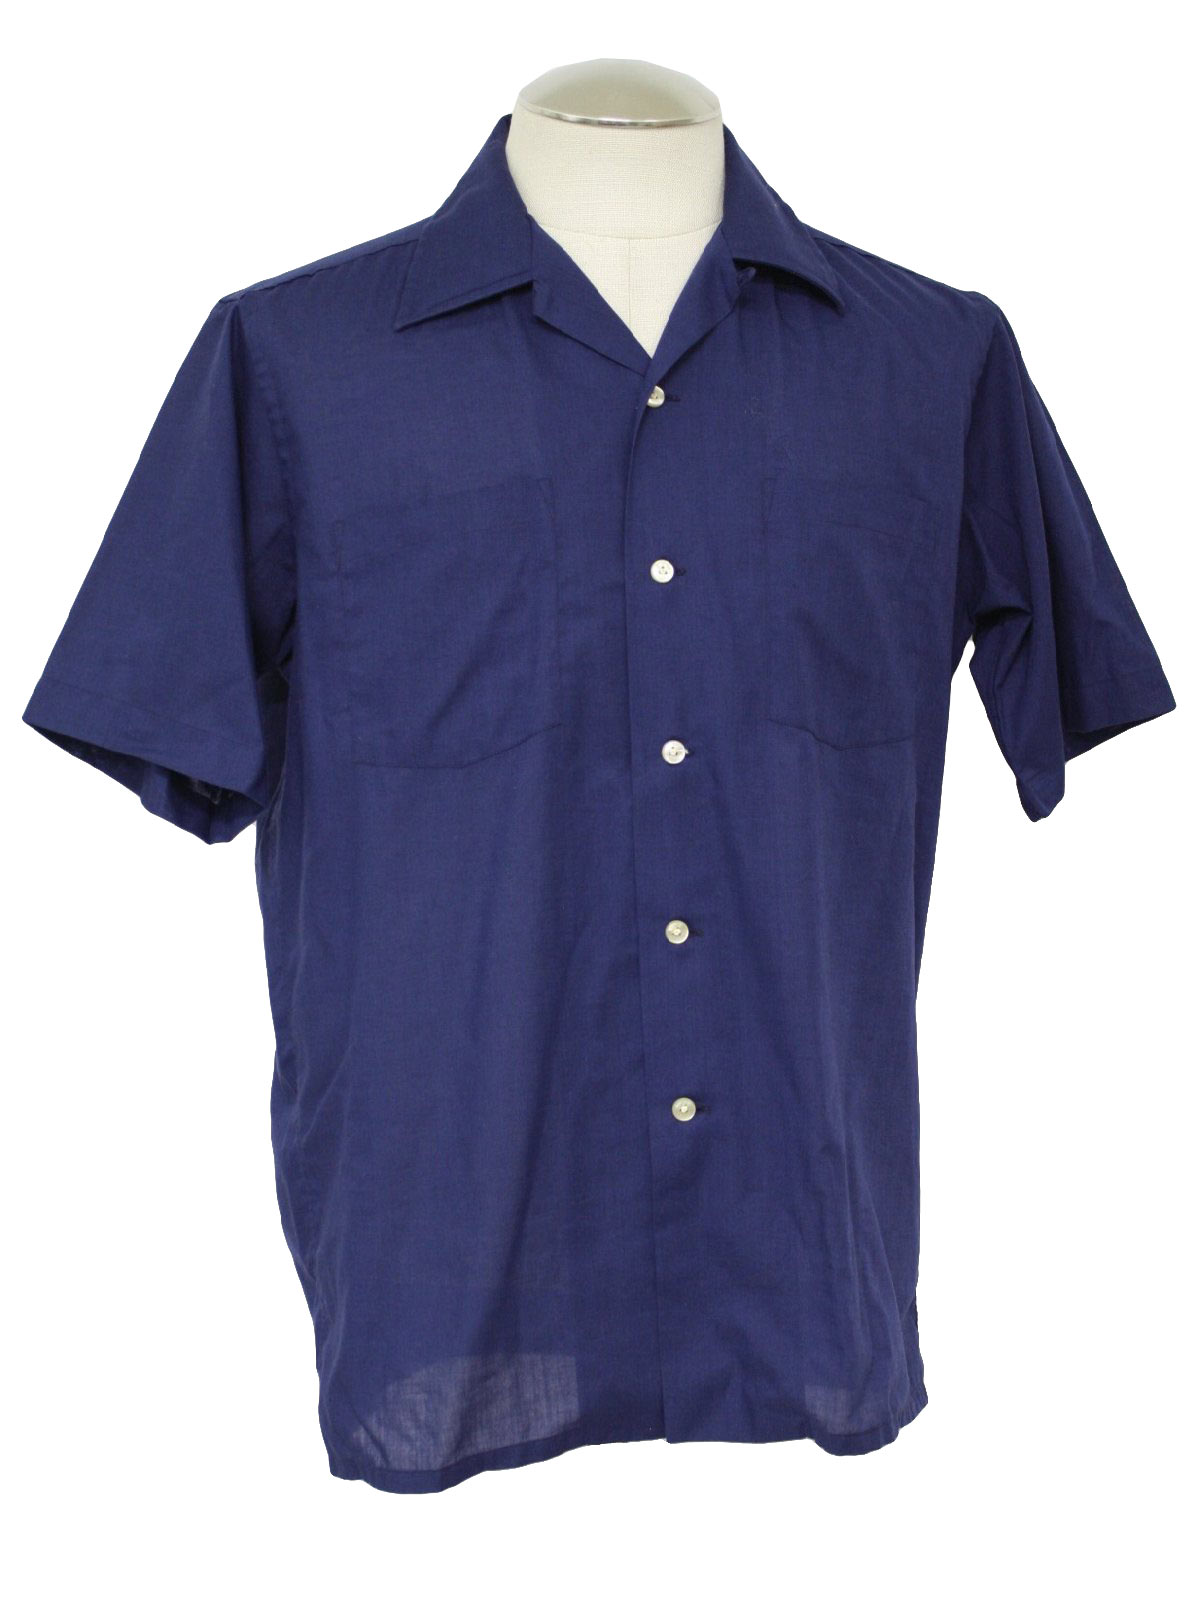 Hathaway 1970s Vintage Shirt: 70s -Hathaway- Mens navy polyester cotton ...